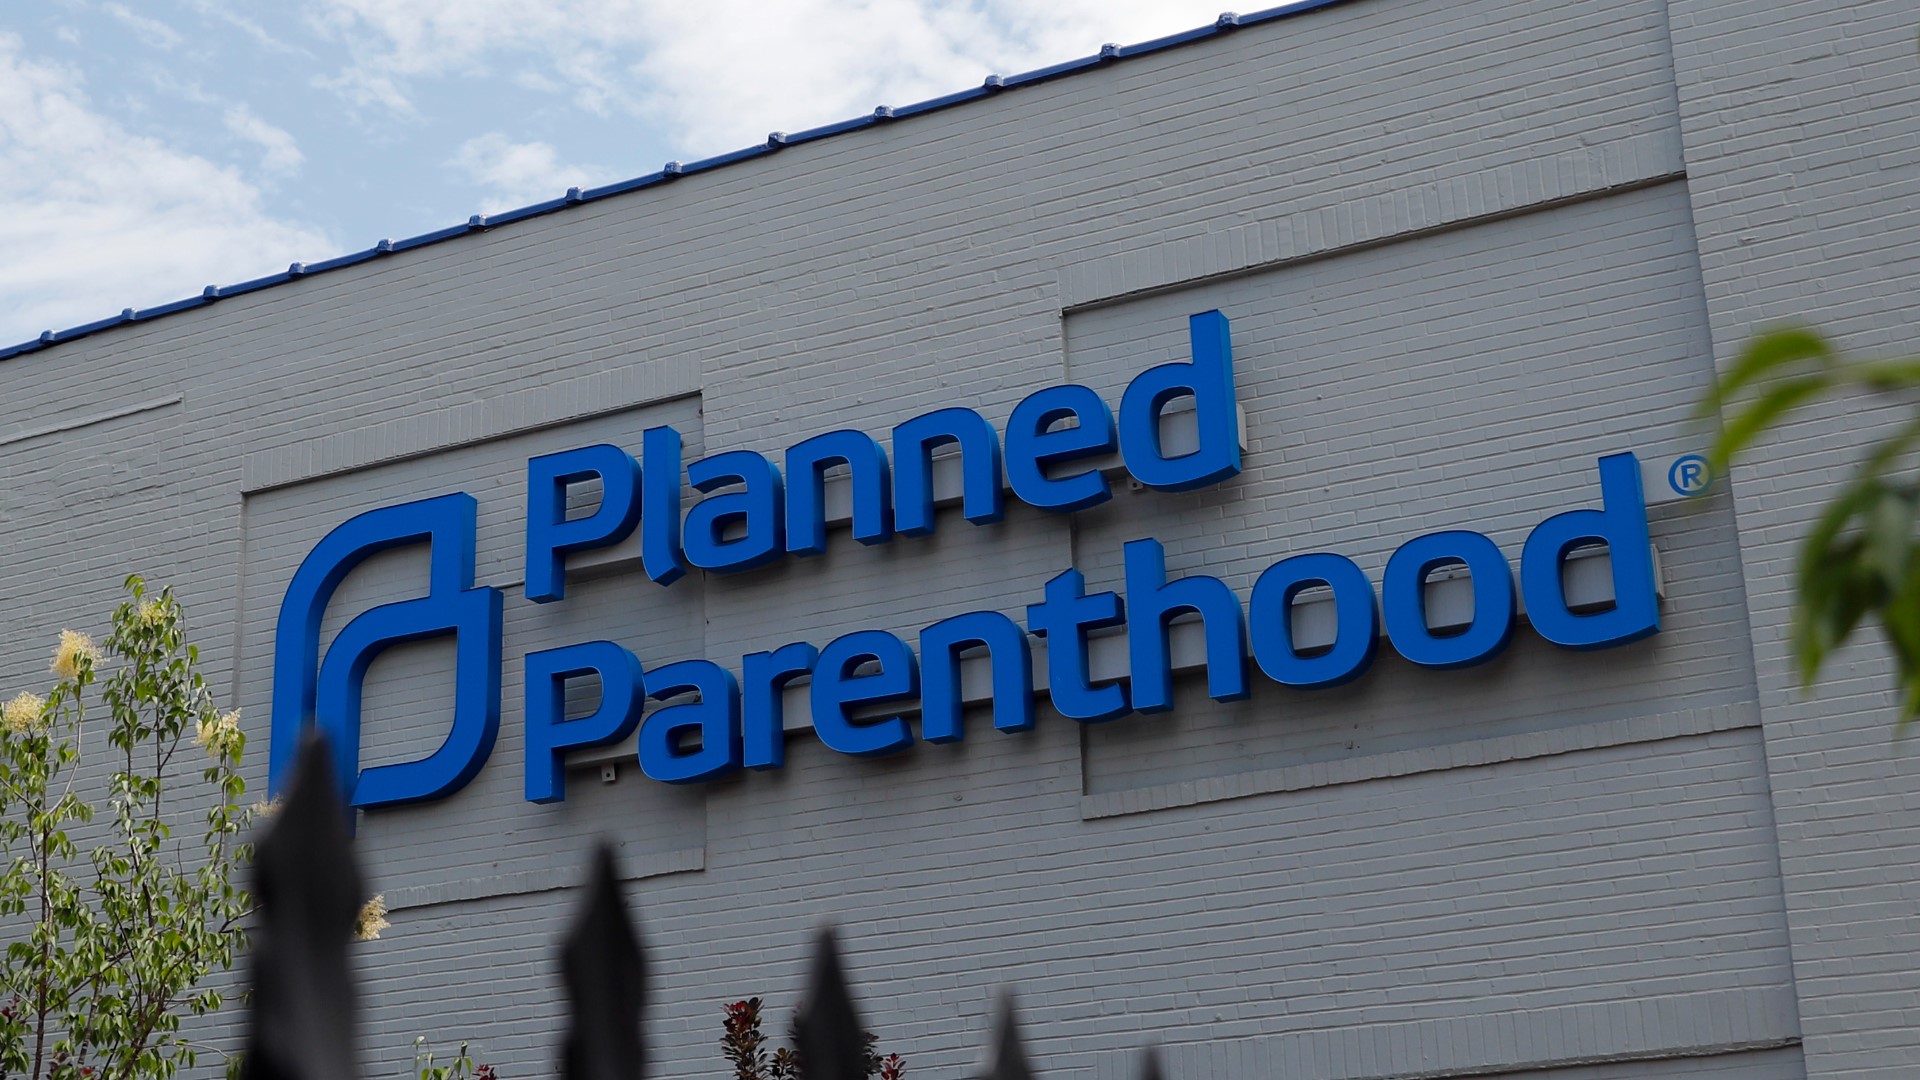 This will mark the first time a Planned Parenthood clinic has offered abortions in Lancaster County.